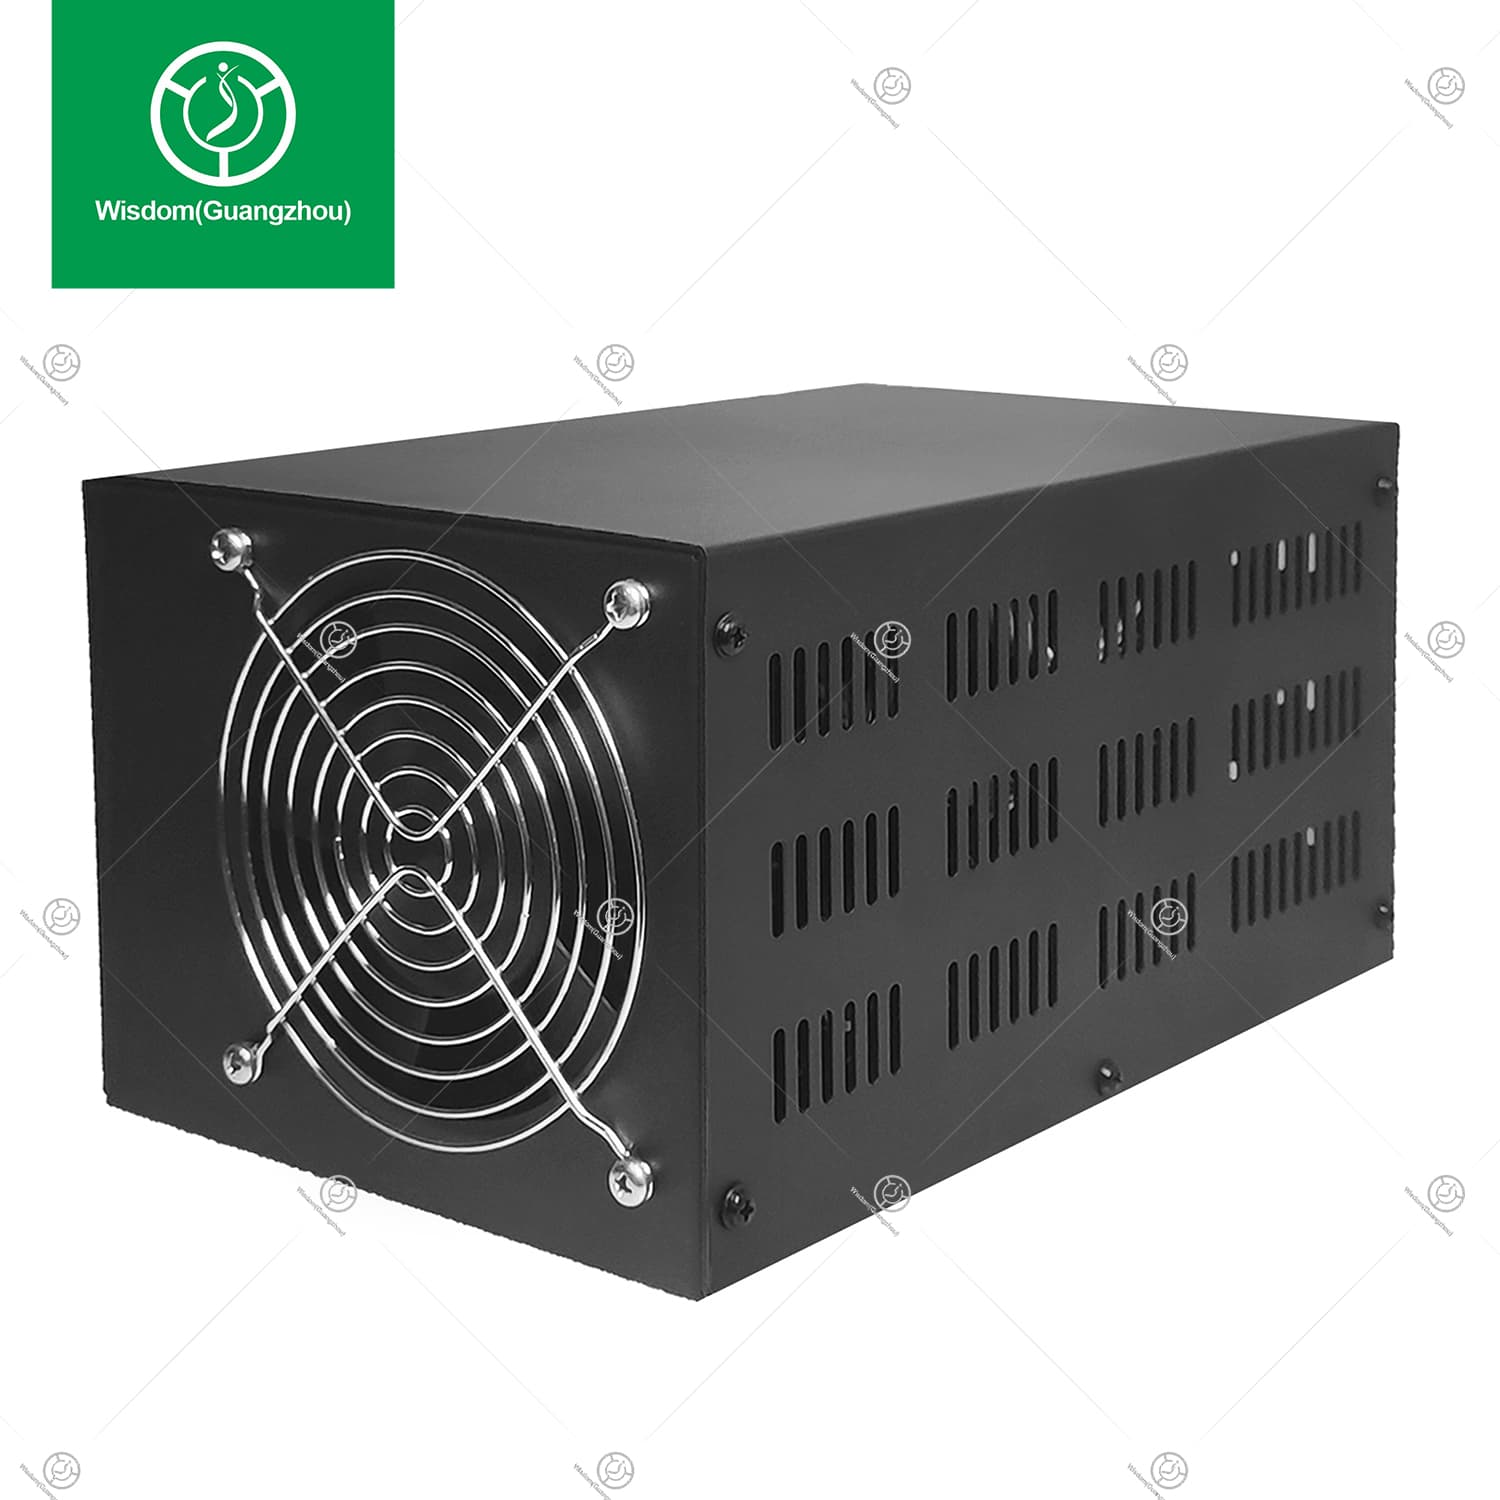 800W IPL Power Supply Is of High Quality And Good Reputation